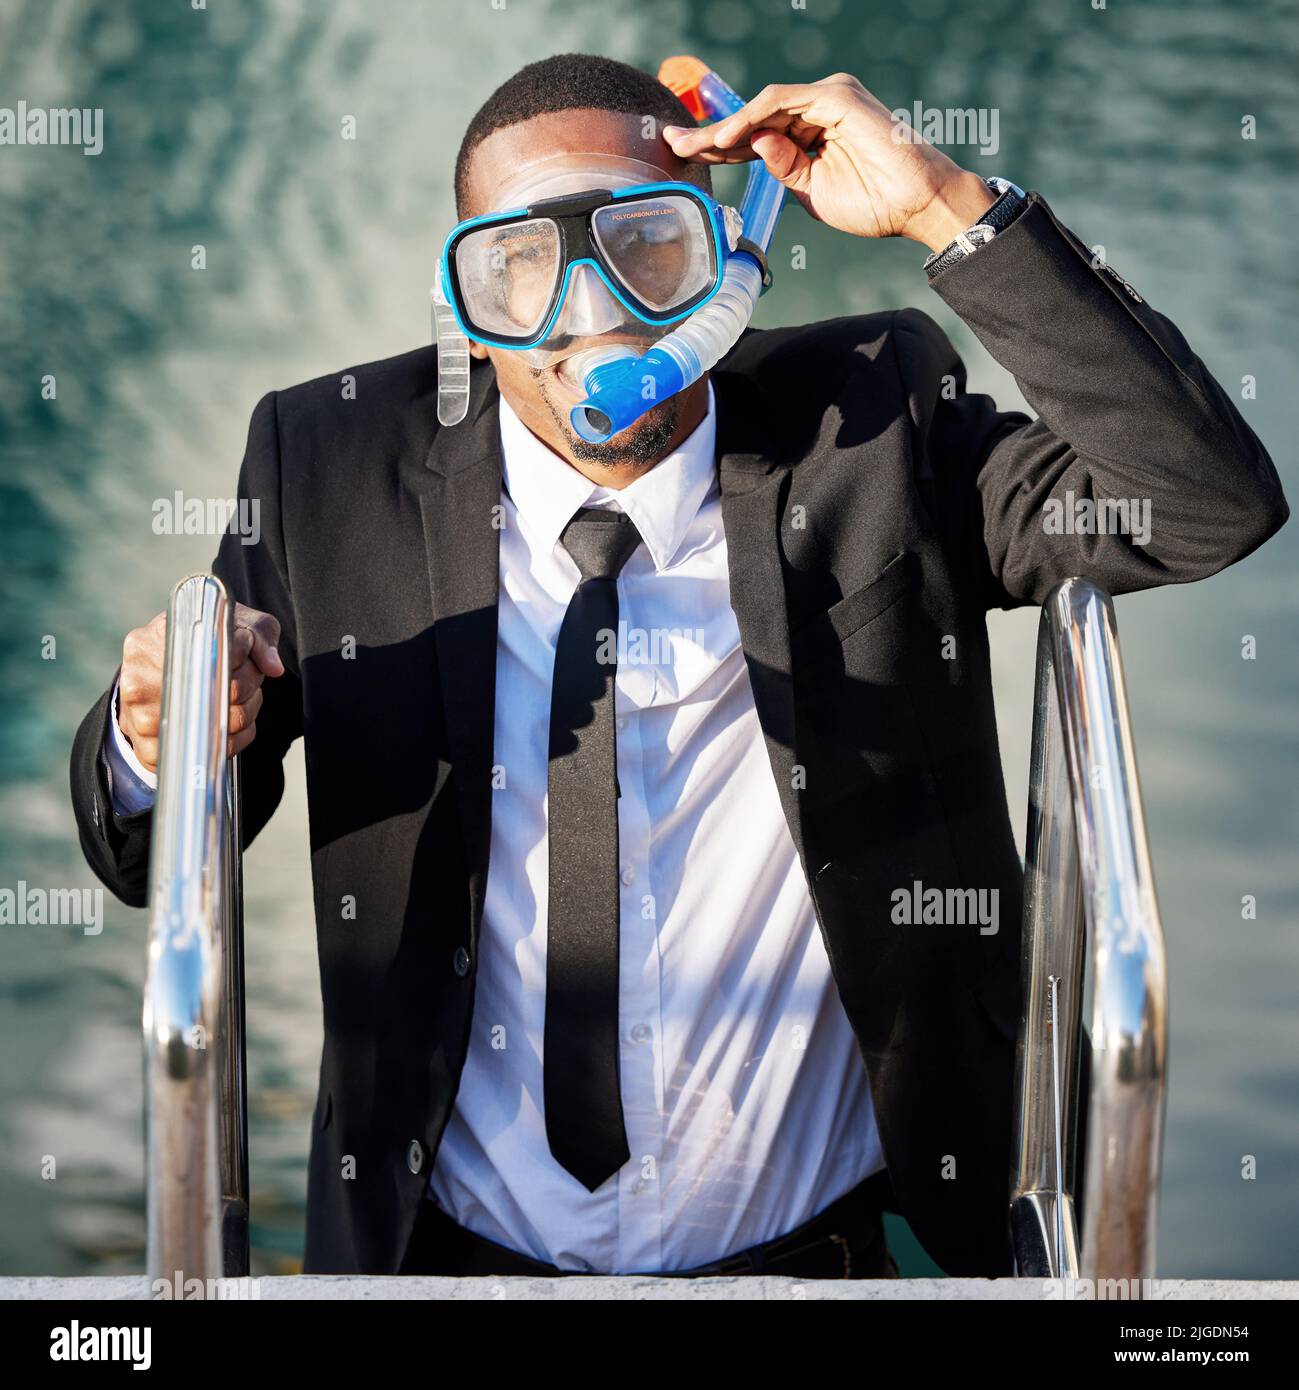 No longer drowning in debt. a businessman getting out of a pool while wearing scuba diving gear. Stock Photo